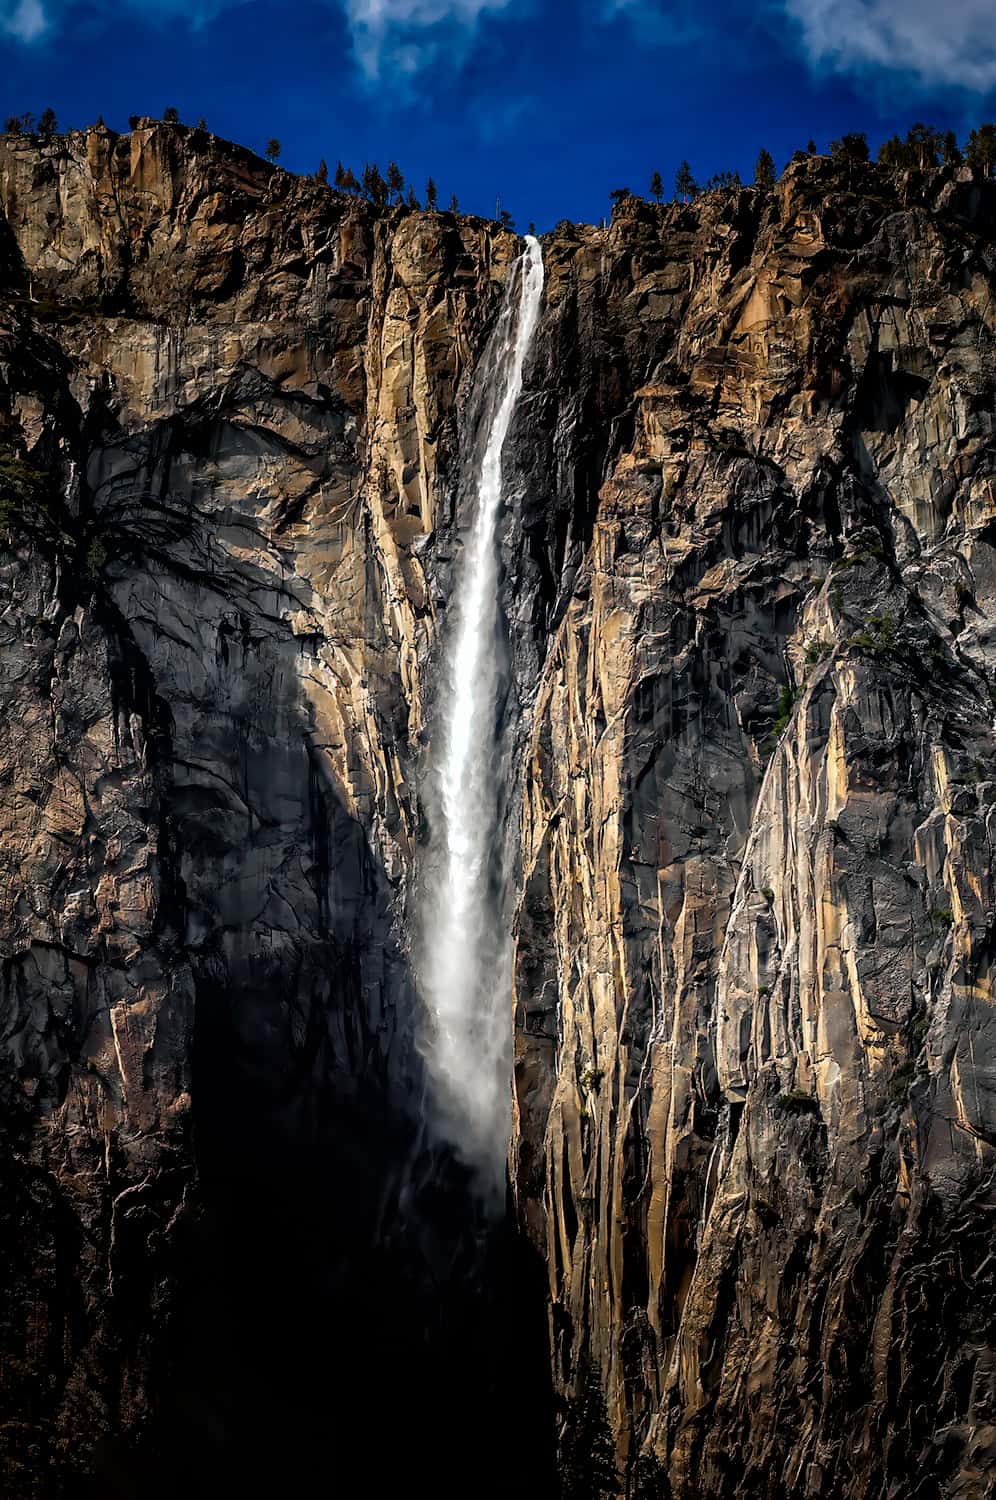 The sweeping flow of Ribbon Fall in Yosemite National Park